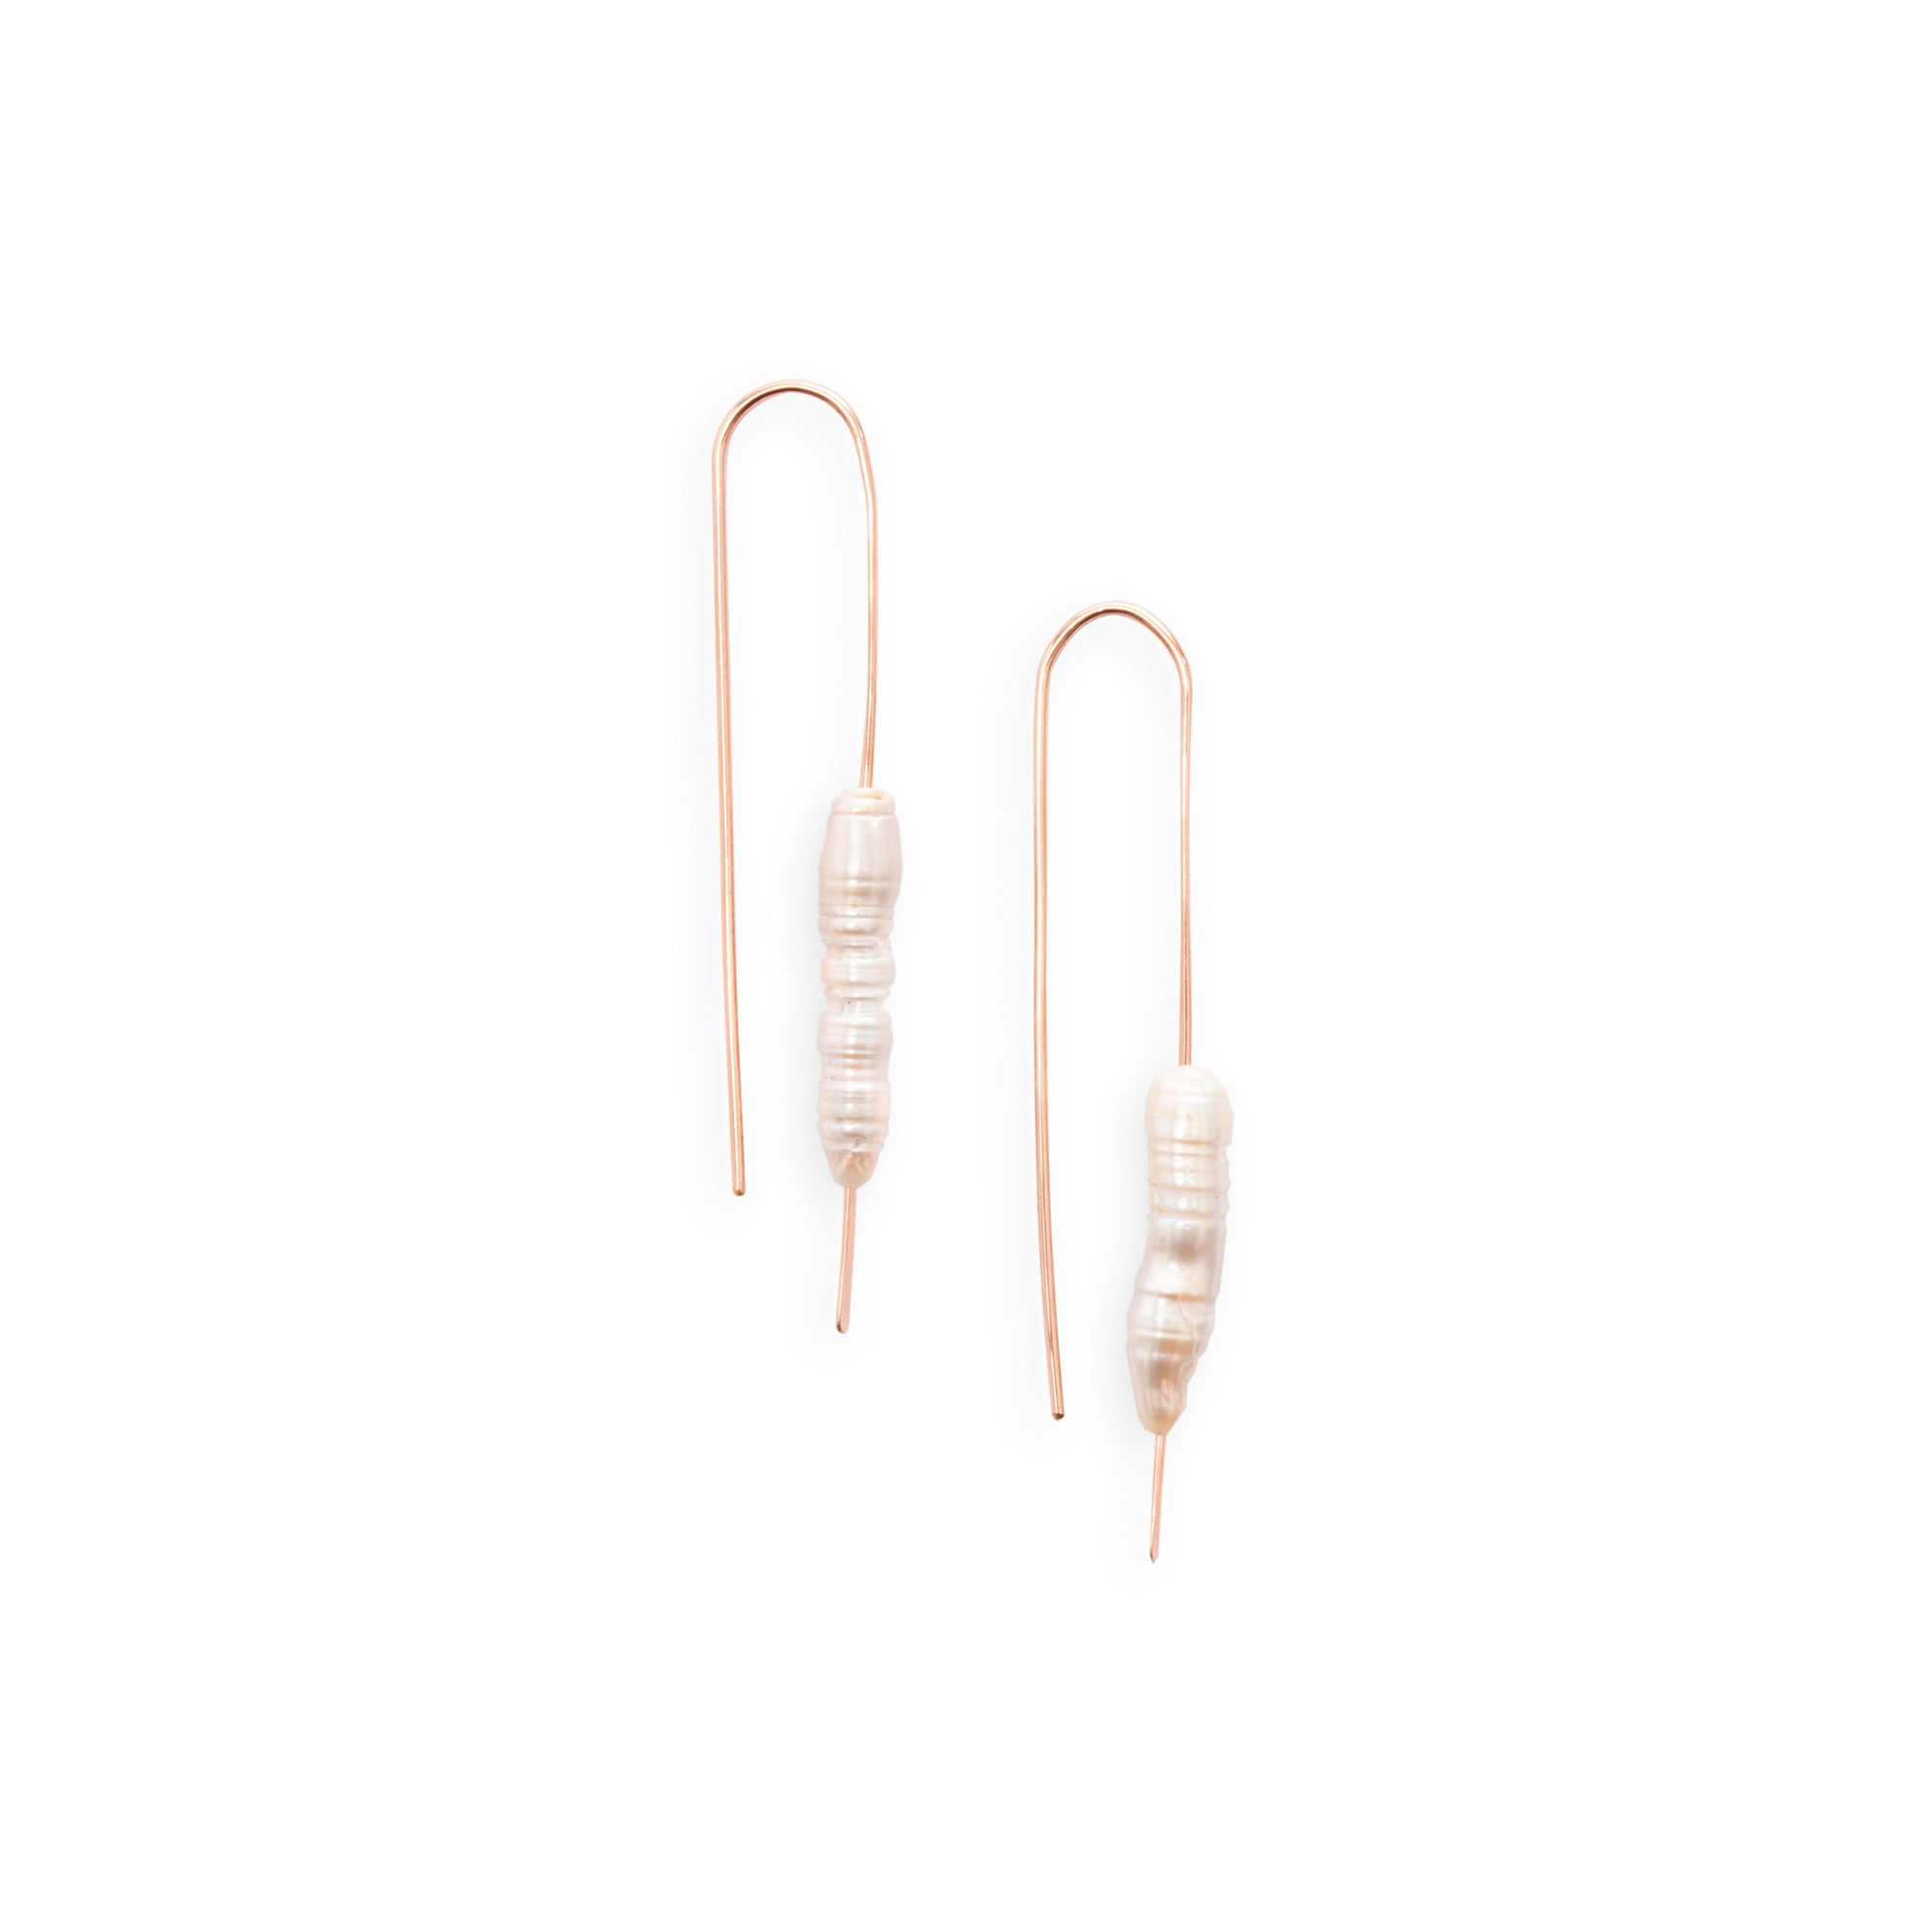 The Long Pearl Earrings feature a column of freshwater pearls that lend an organic element to an understated look